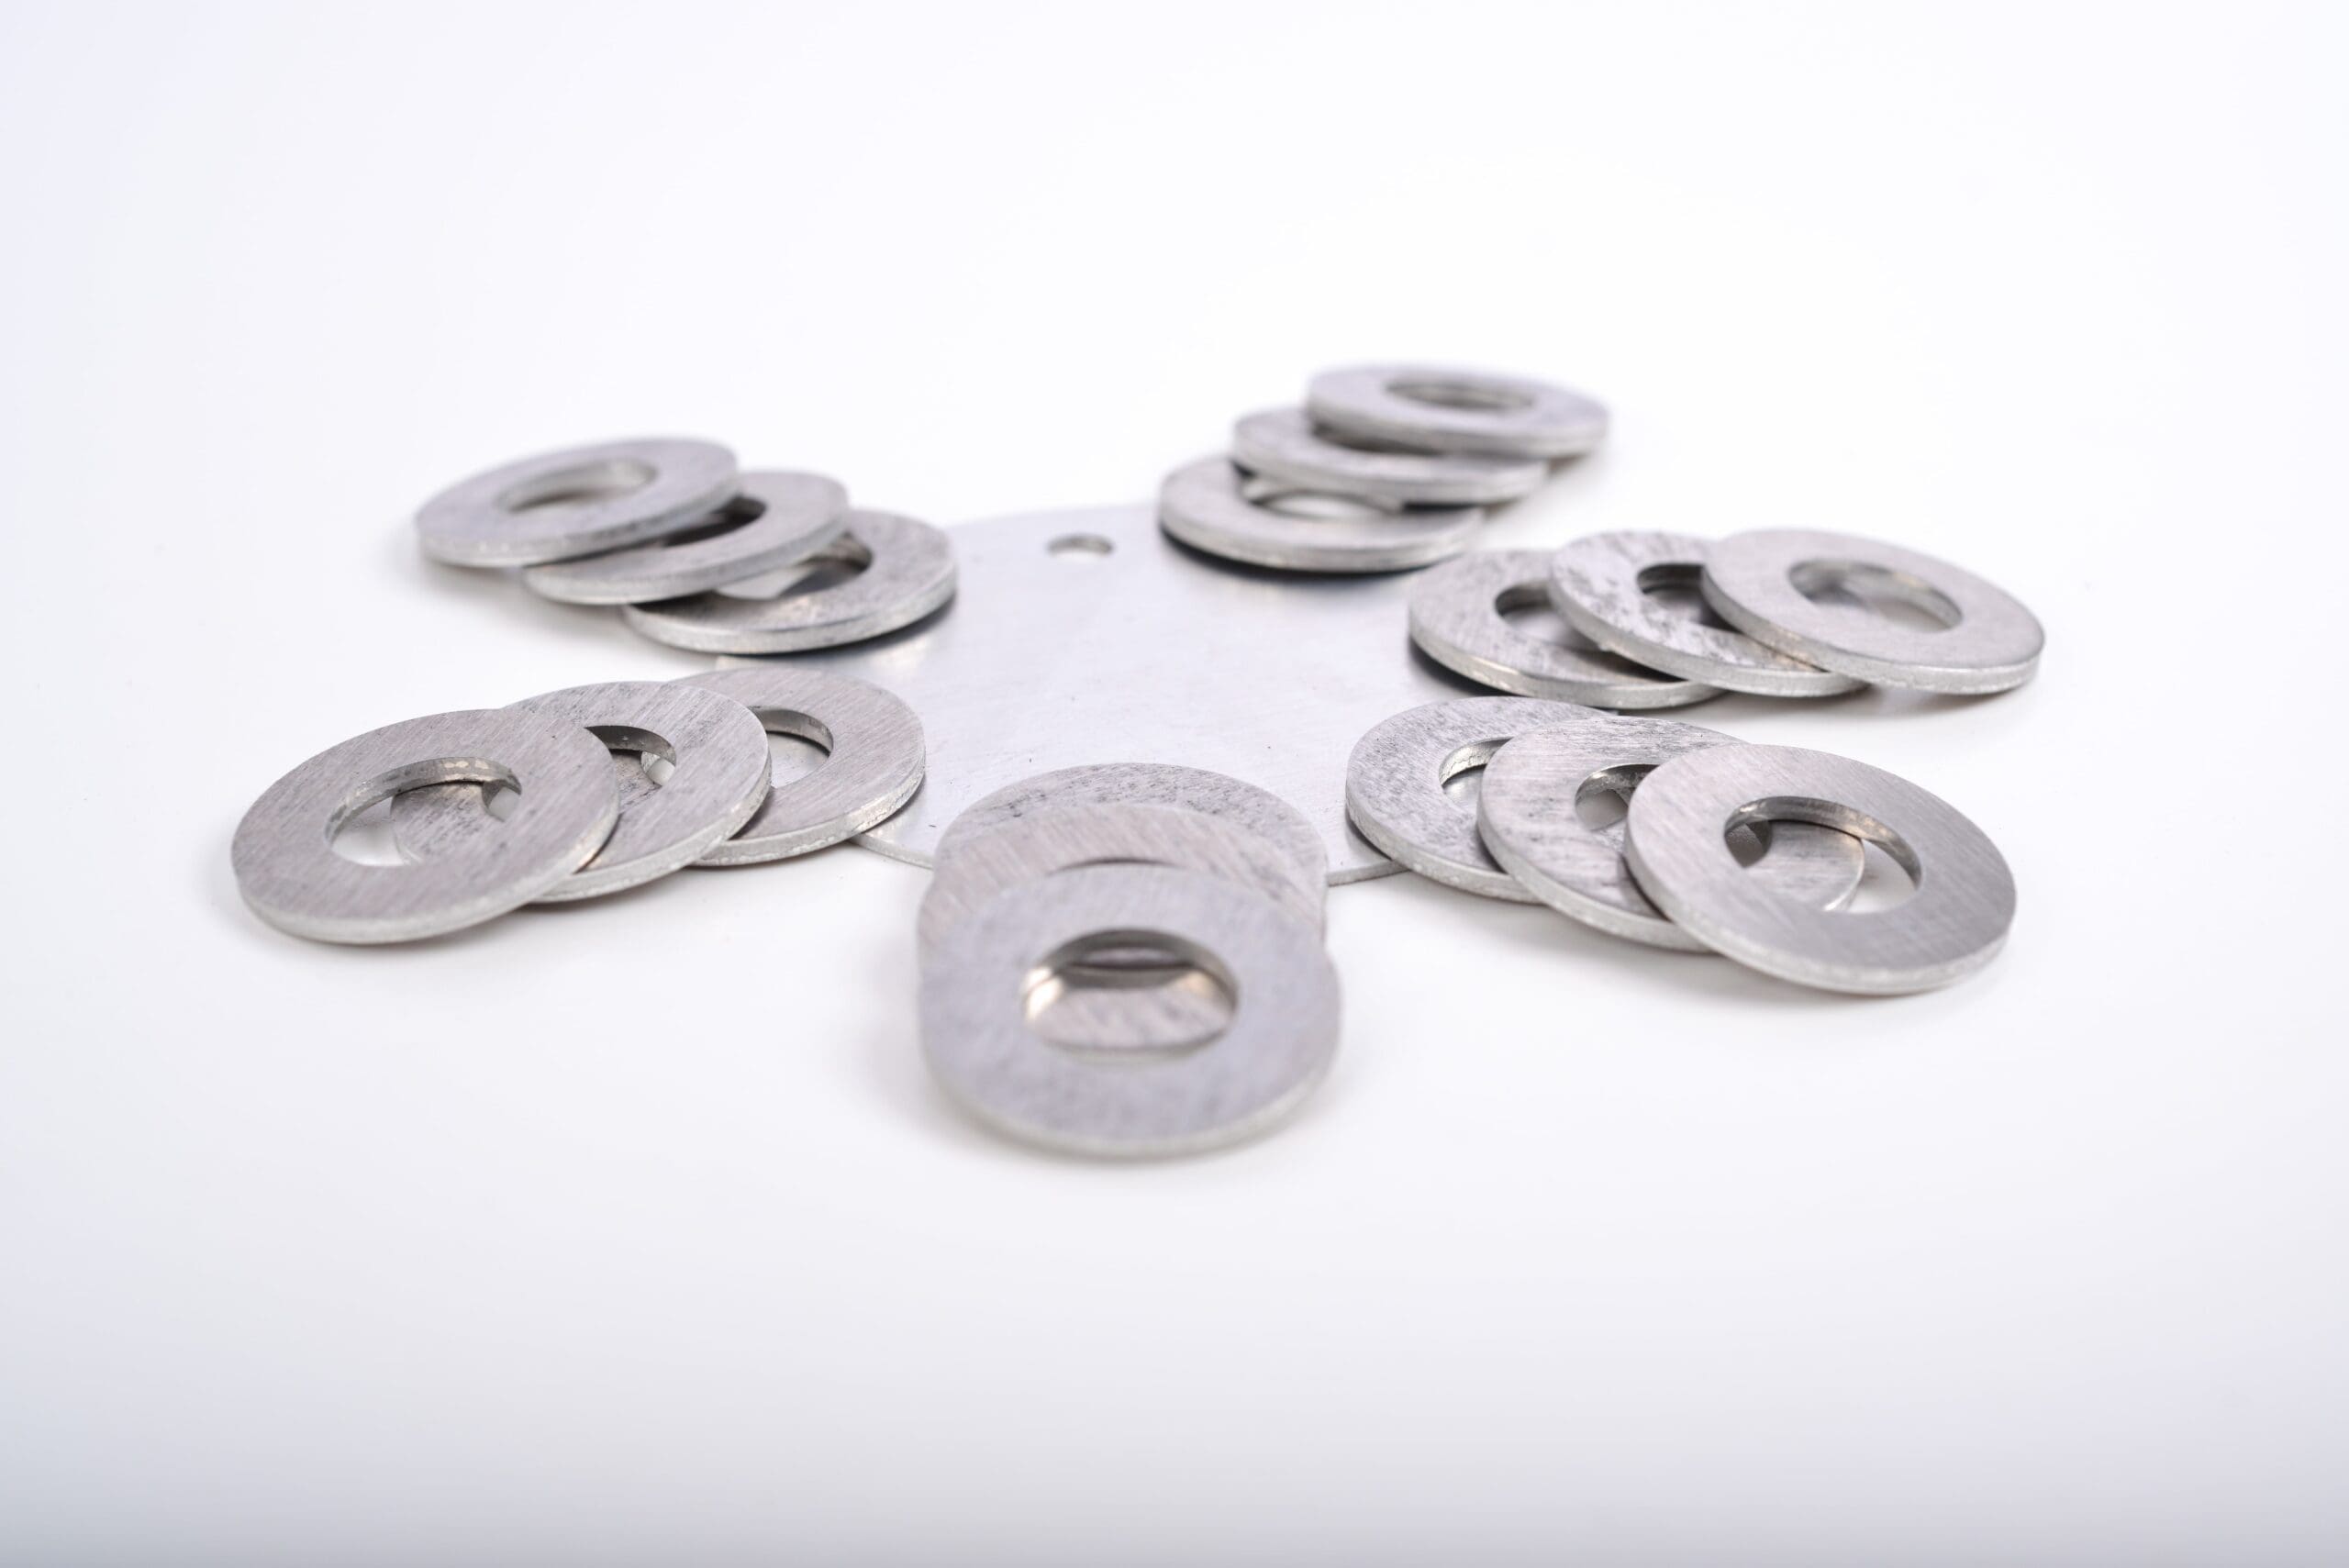 Selection of Shim Washer Materials - Stephens Gaskets Guide”